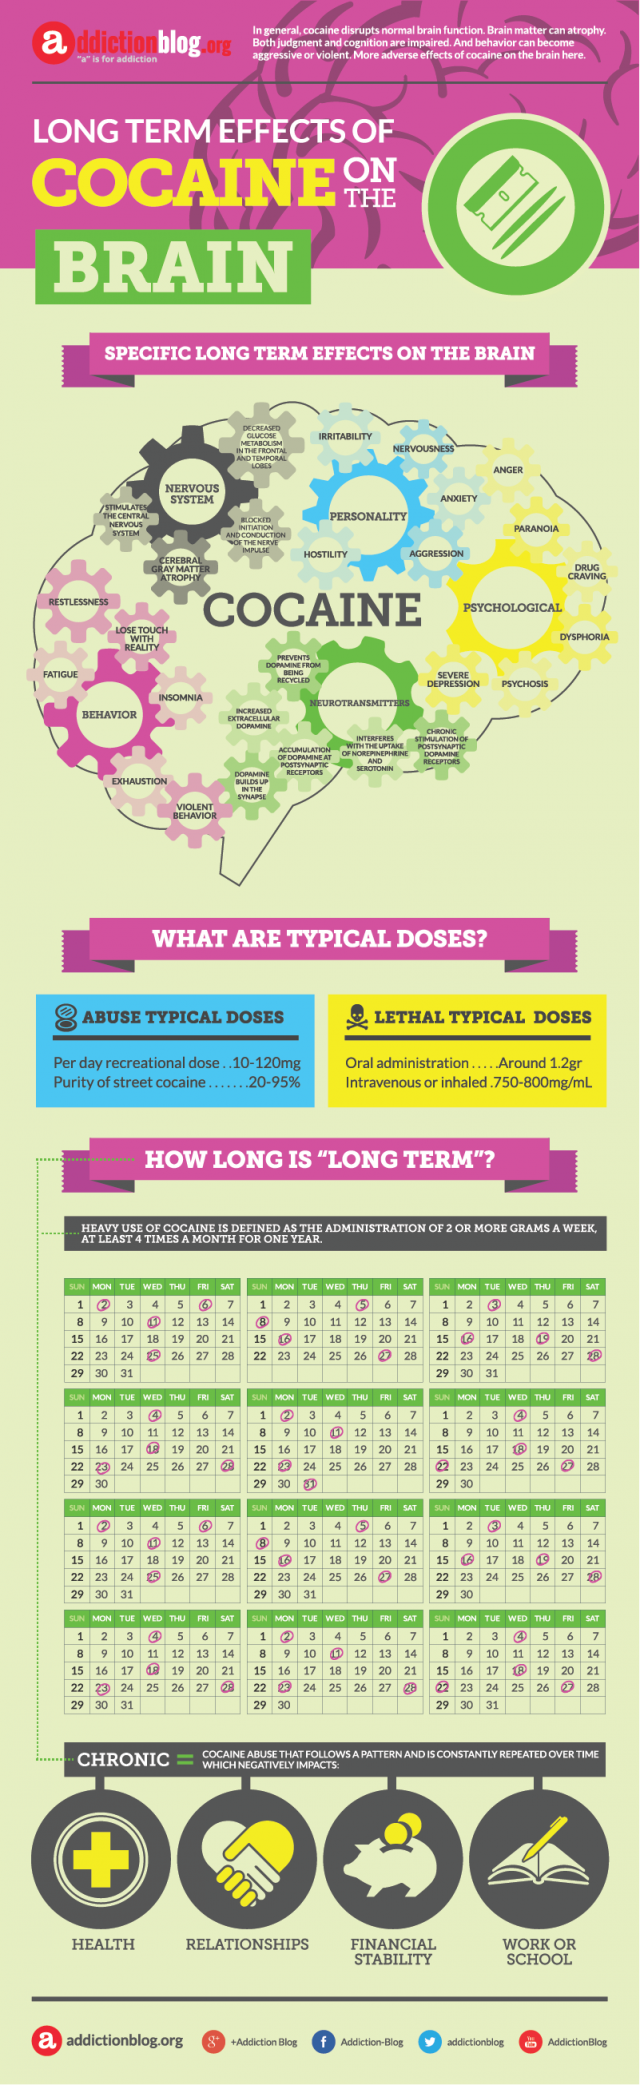 Long term effects of cocaine on the brain (INFOGRAPHIC)